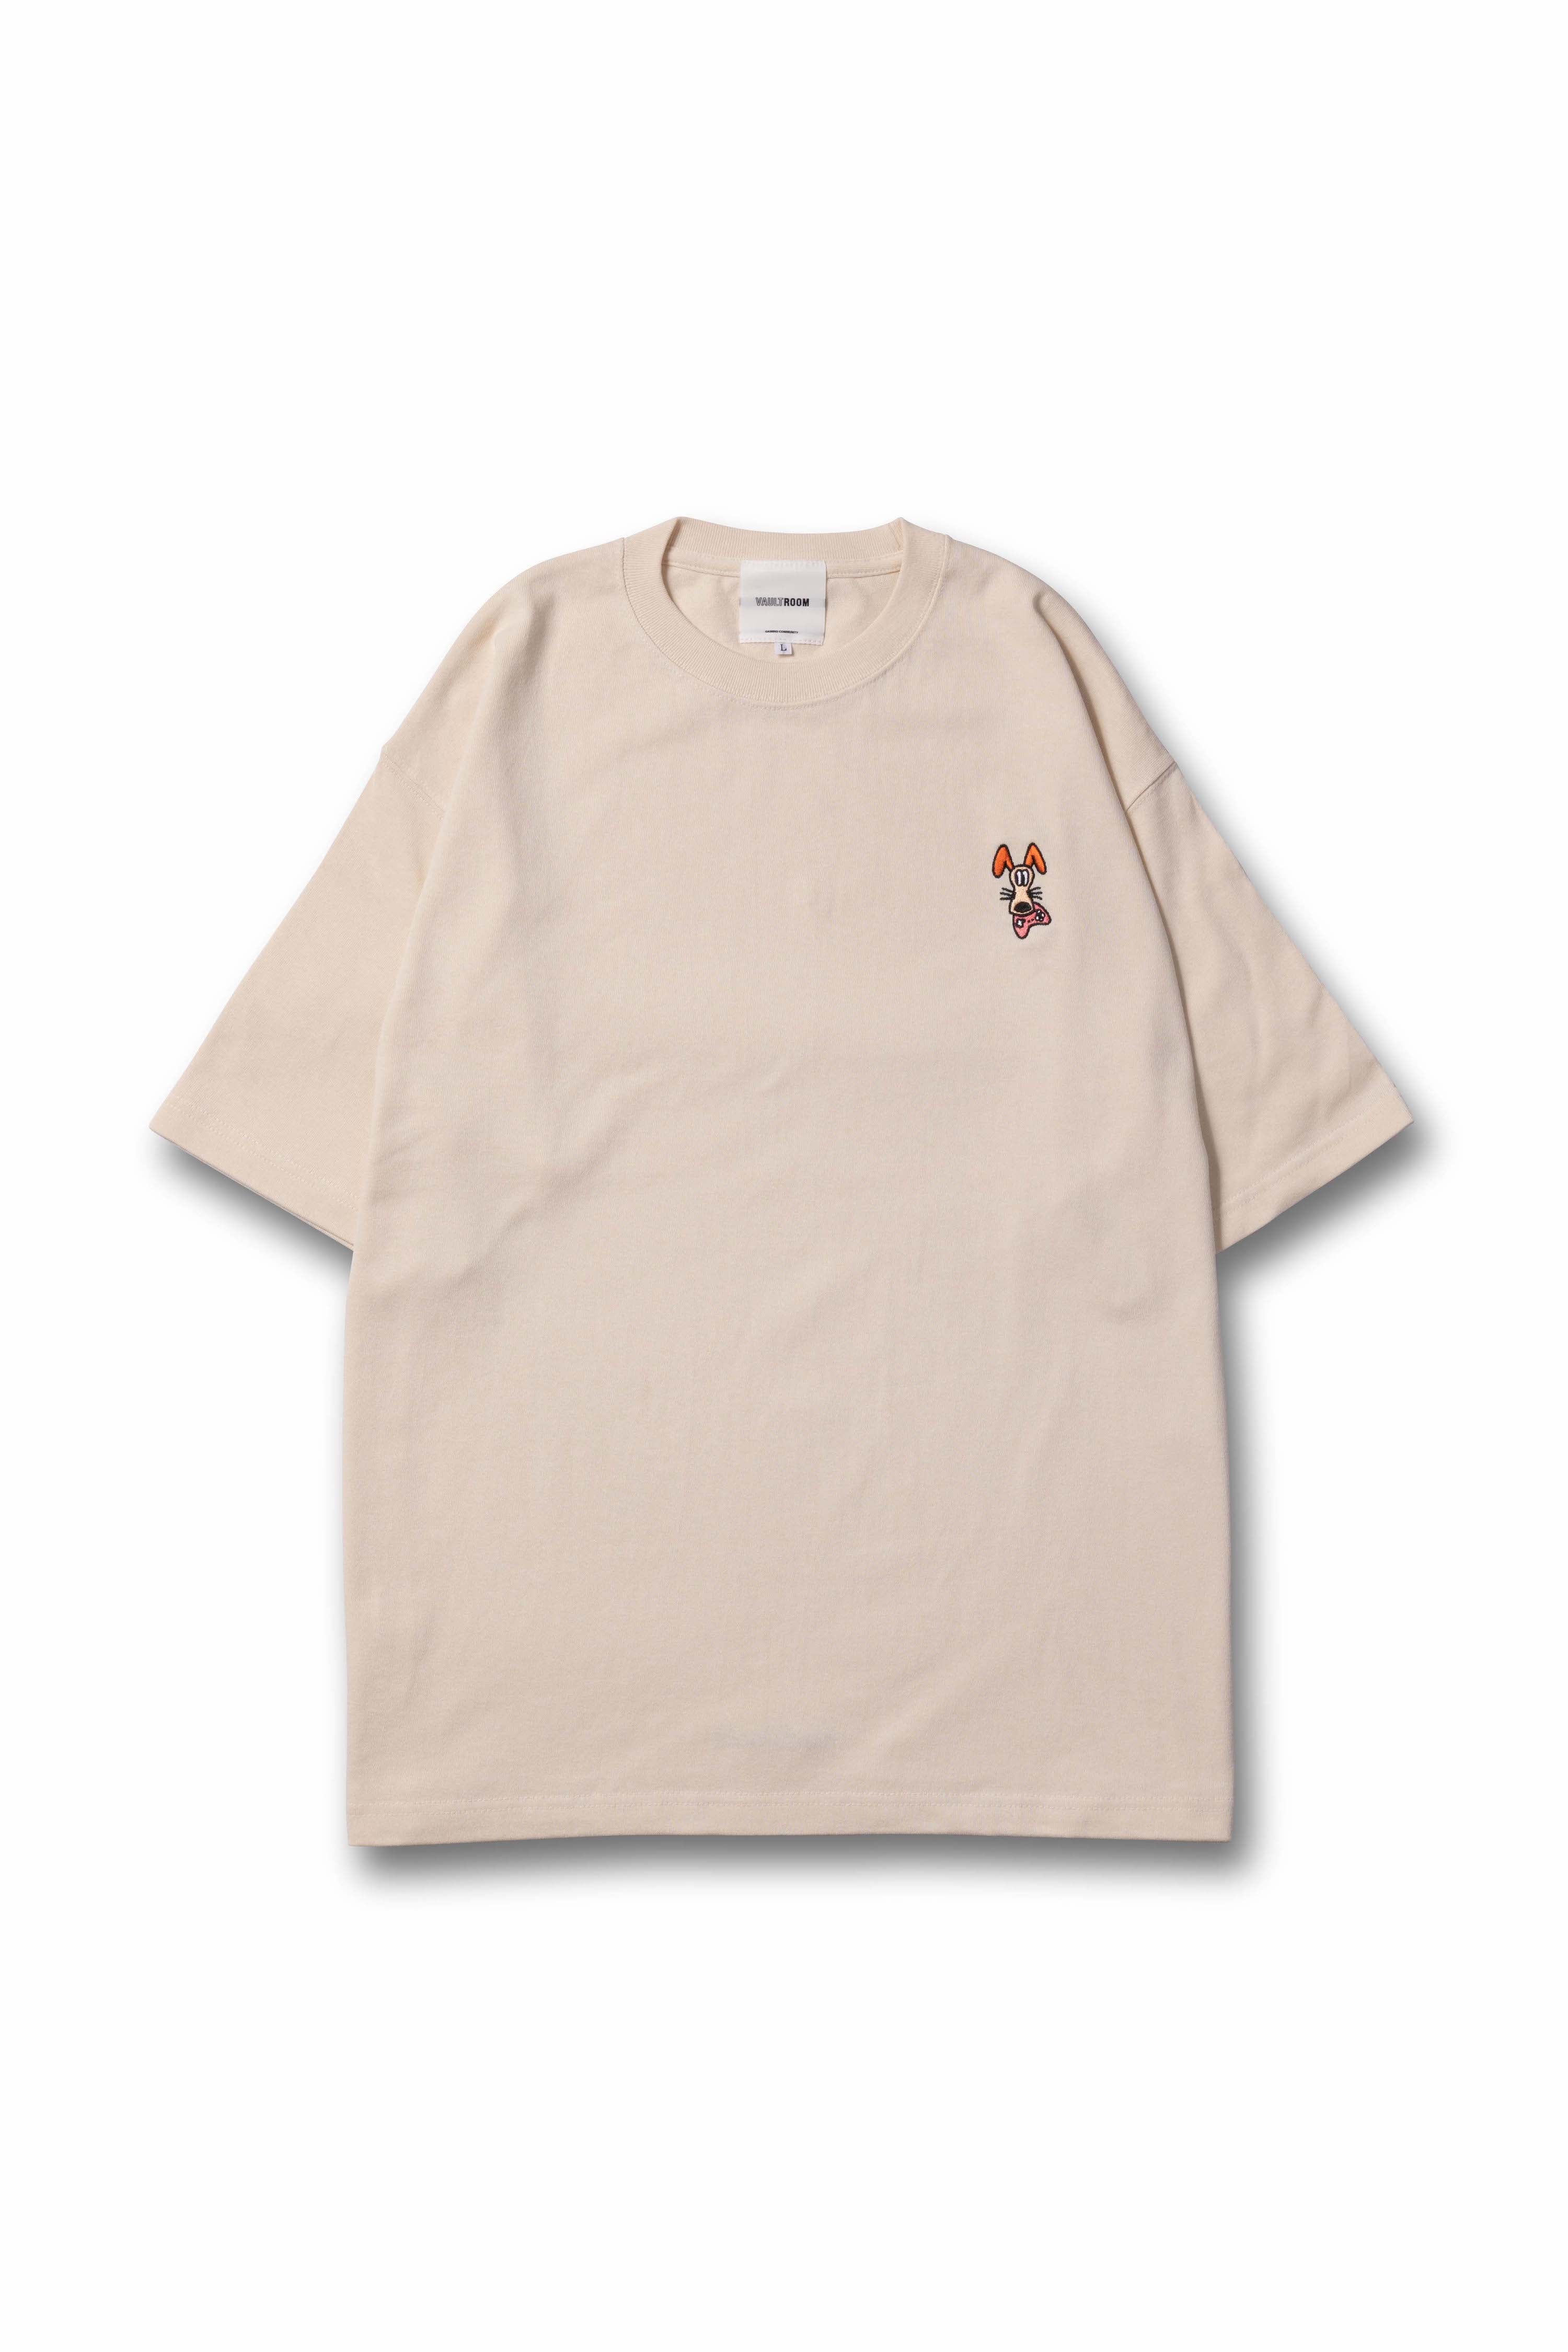 vaultroom KEY DOG ONE POINT TEE - Tシャツ/カットソー(半袖/袖